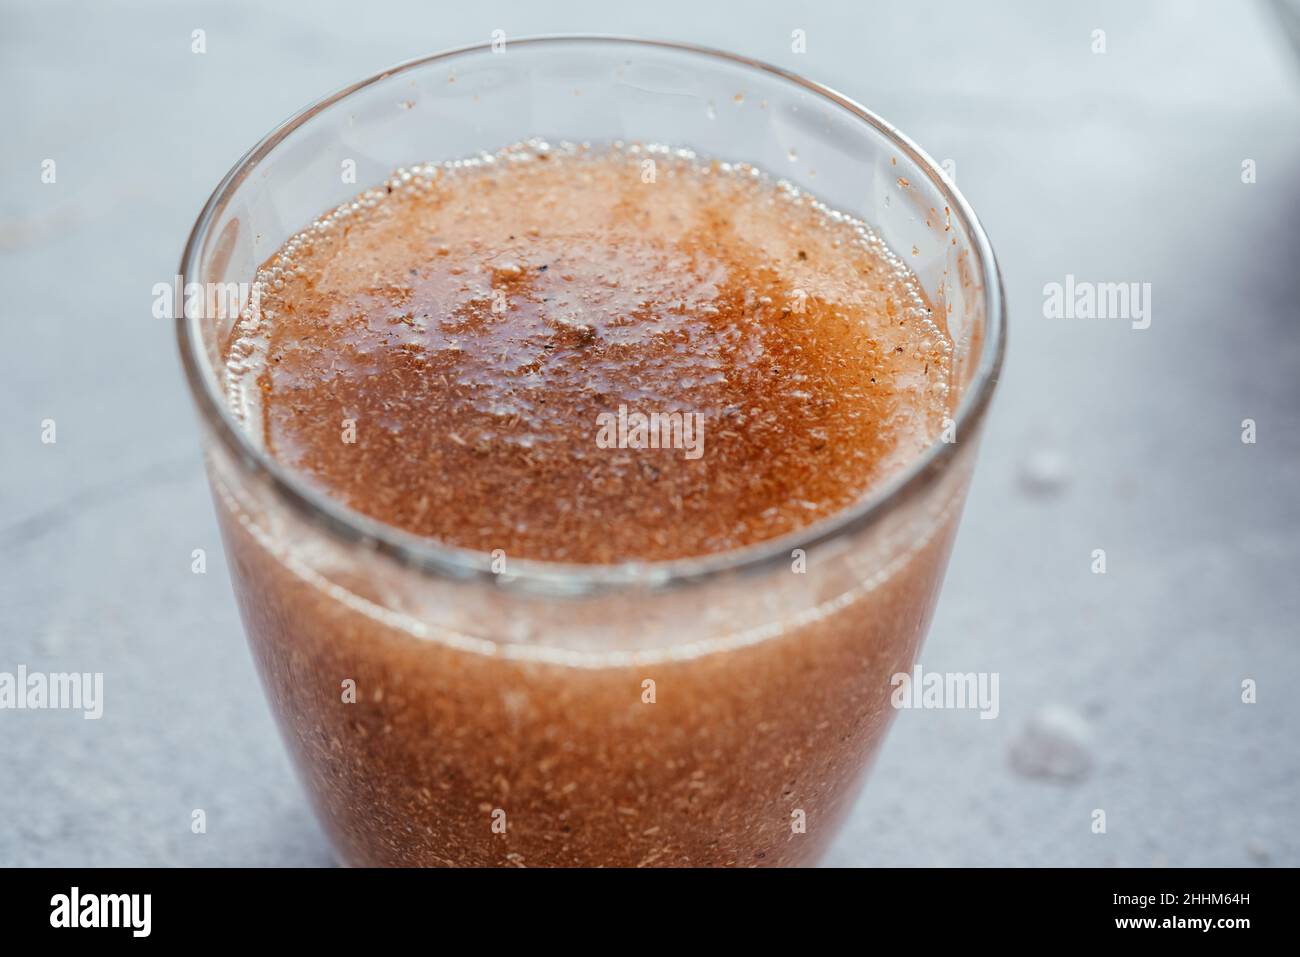 A glass of water soluble psyllium husk dietary fiber supplement, healthy diet morning routine Stock Photo